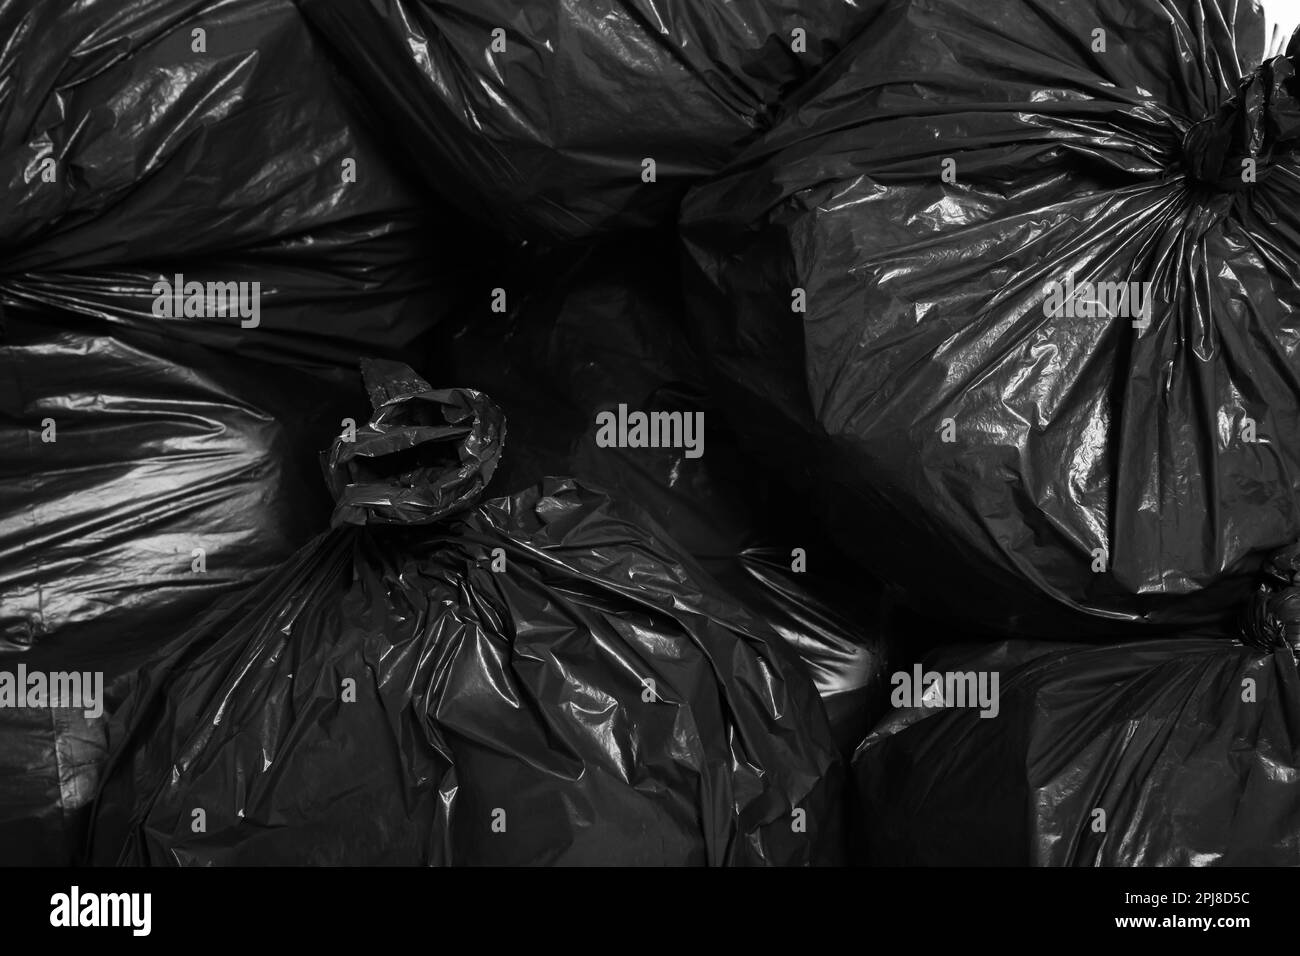 Black trash bags full of garbage as background, top view Stock Photo ...